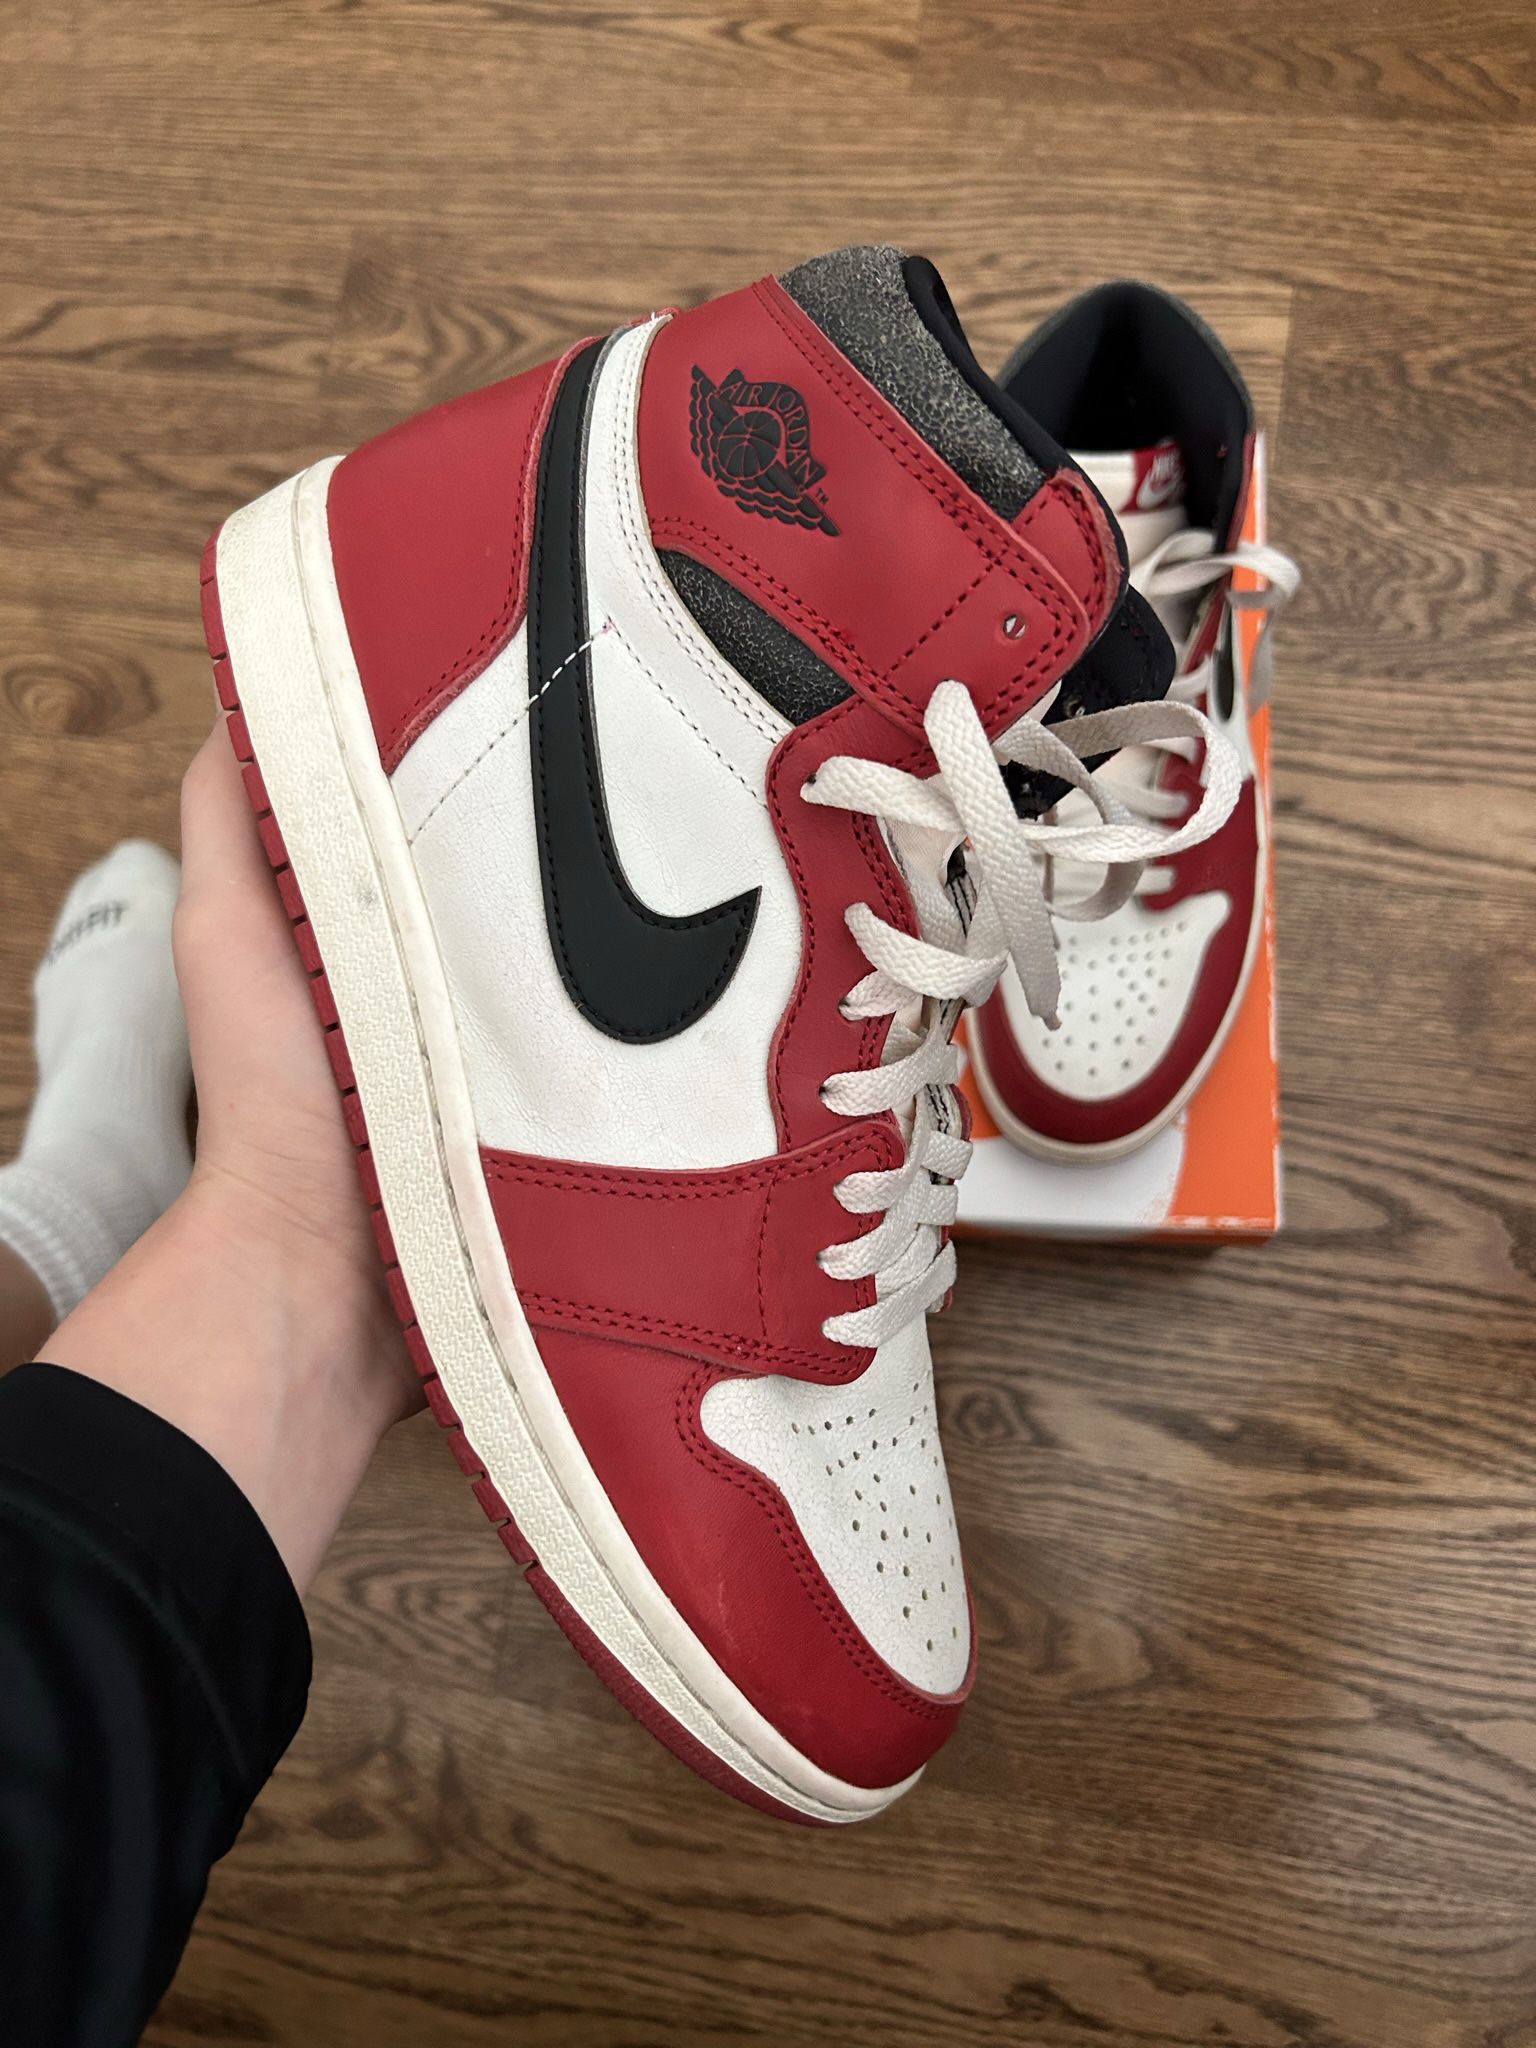 Used Jordan 1 Lost and Found